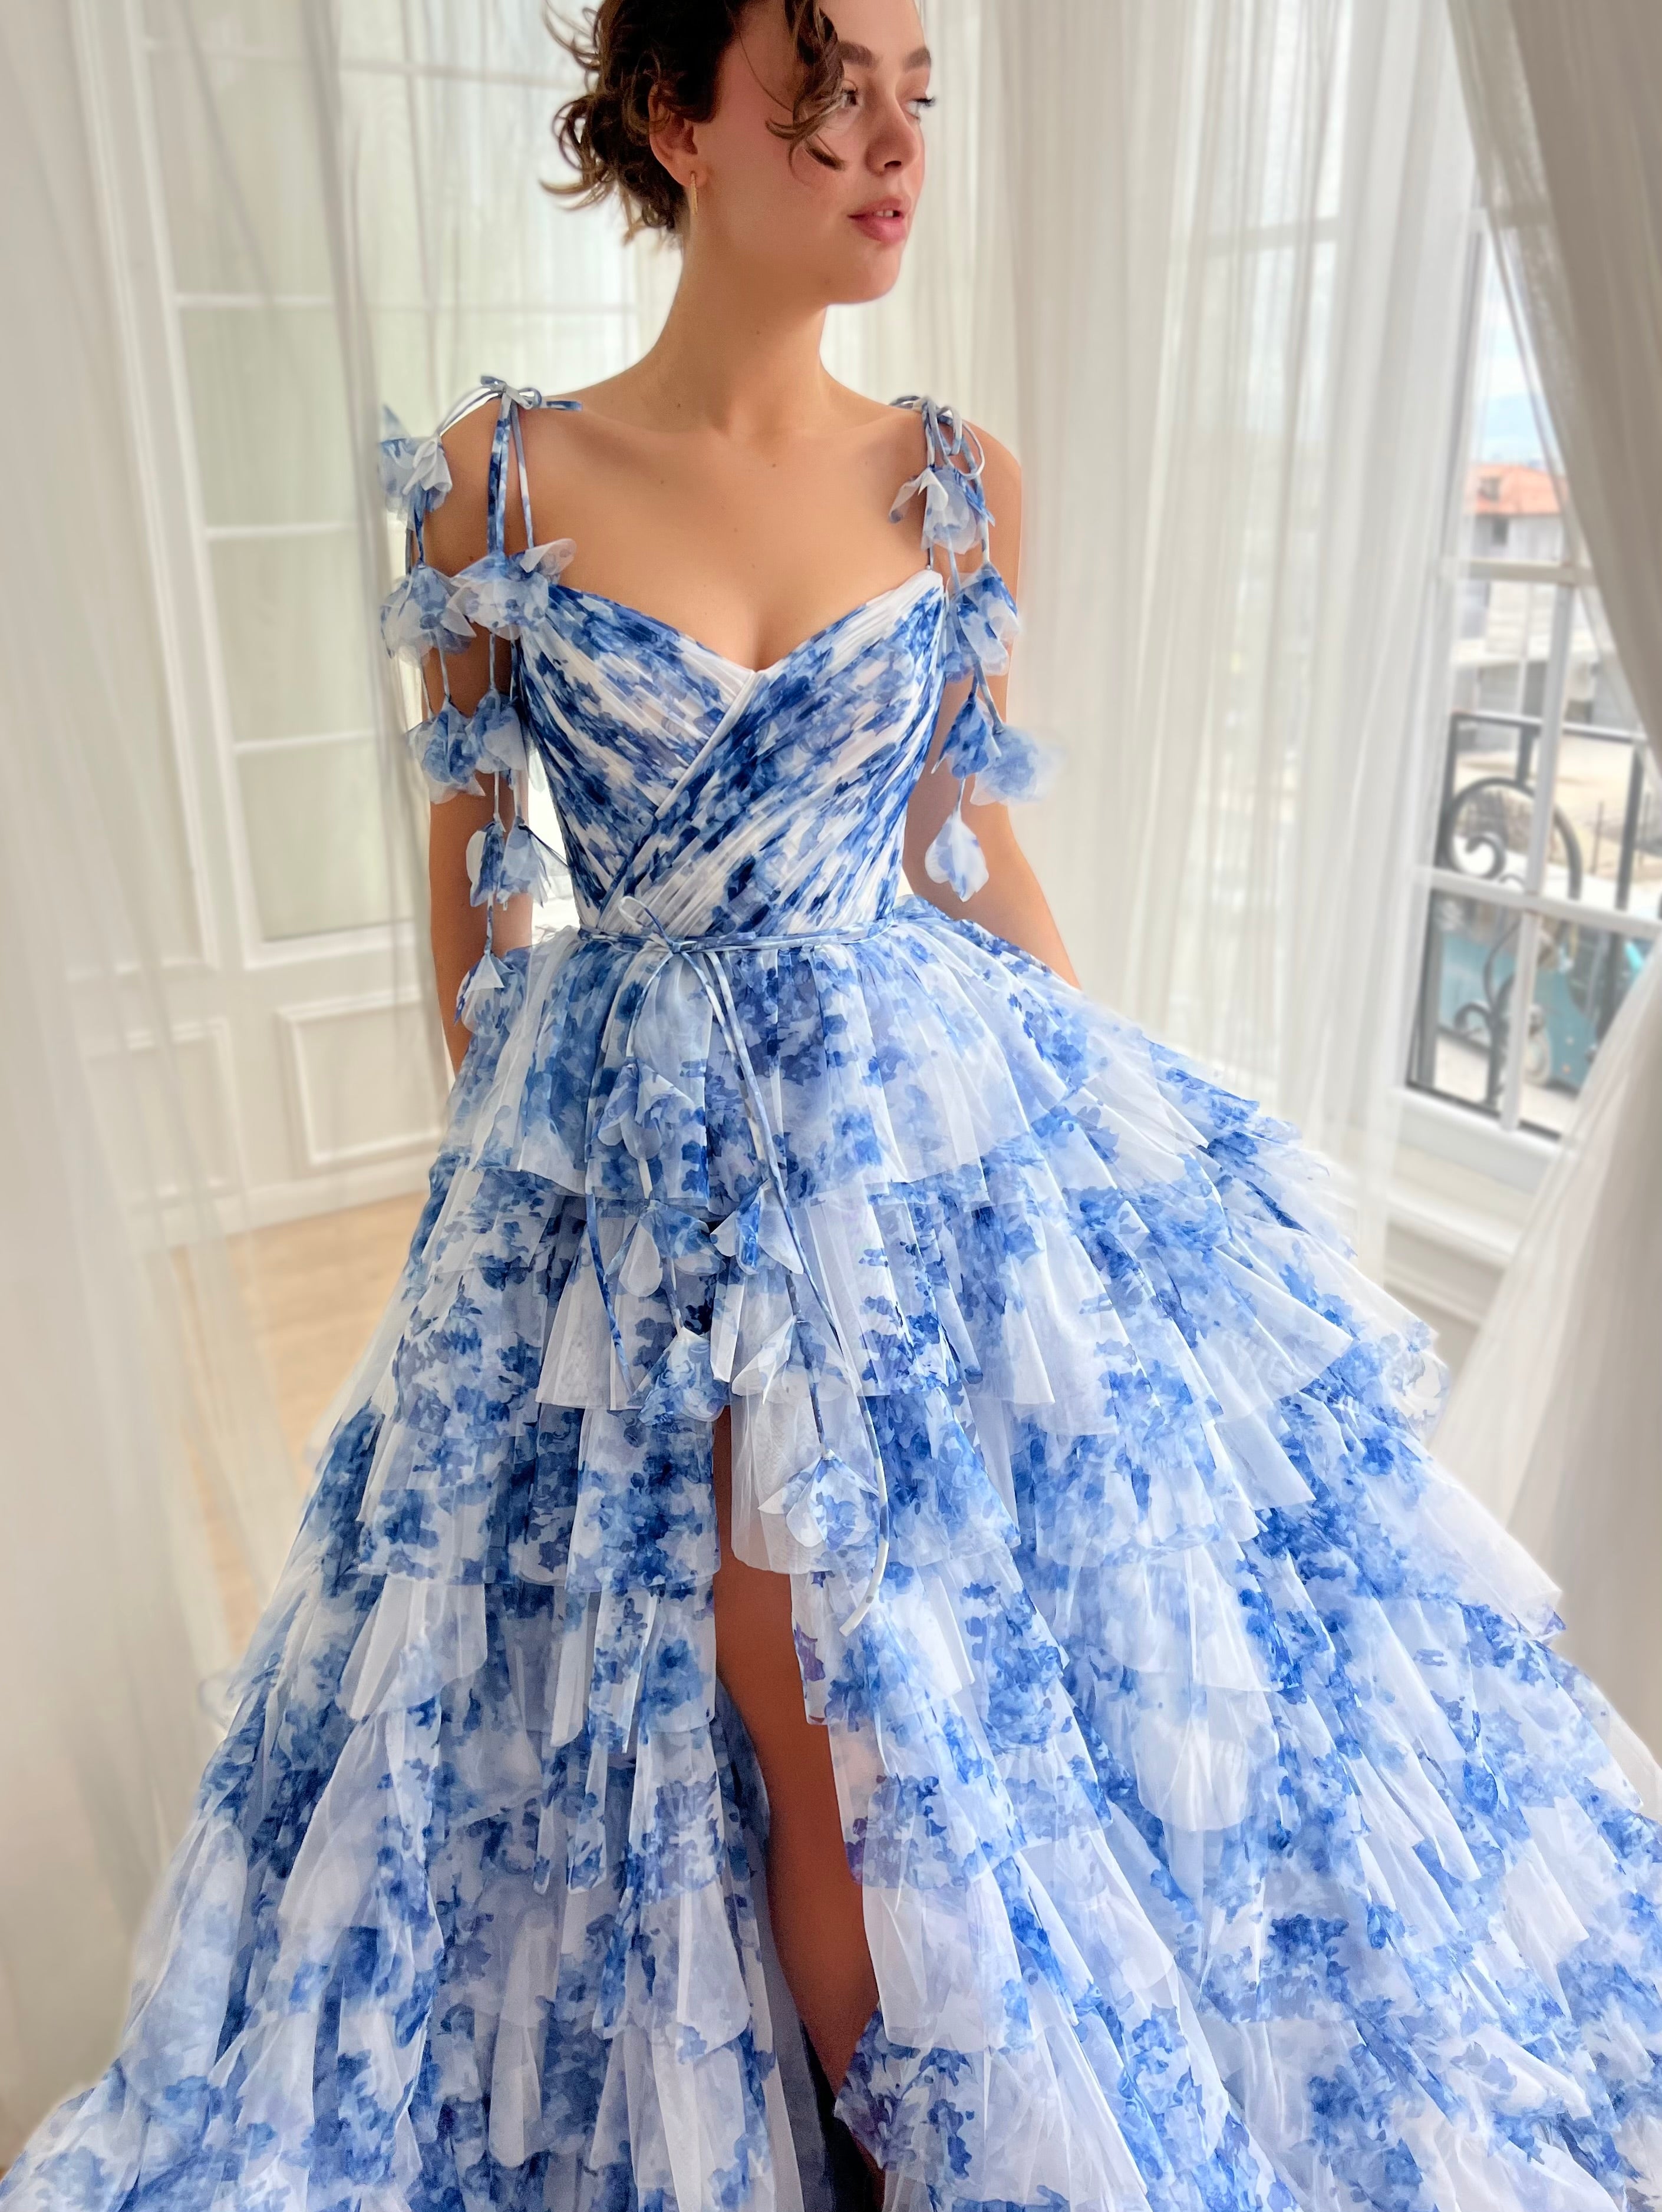 Blue A-Line dress with floral print, spaghetti straps and off the shoulder sleeves